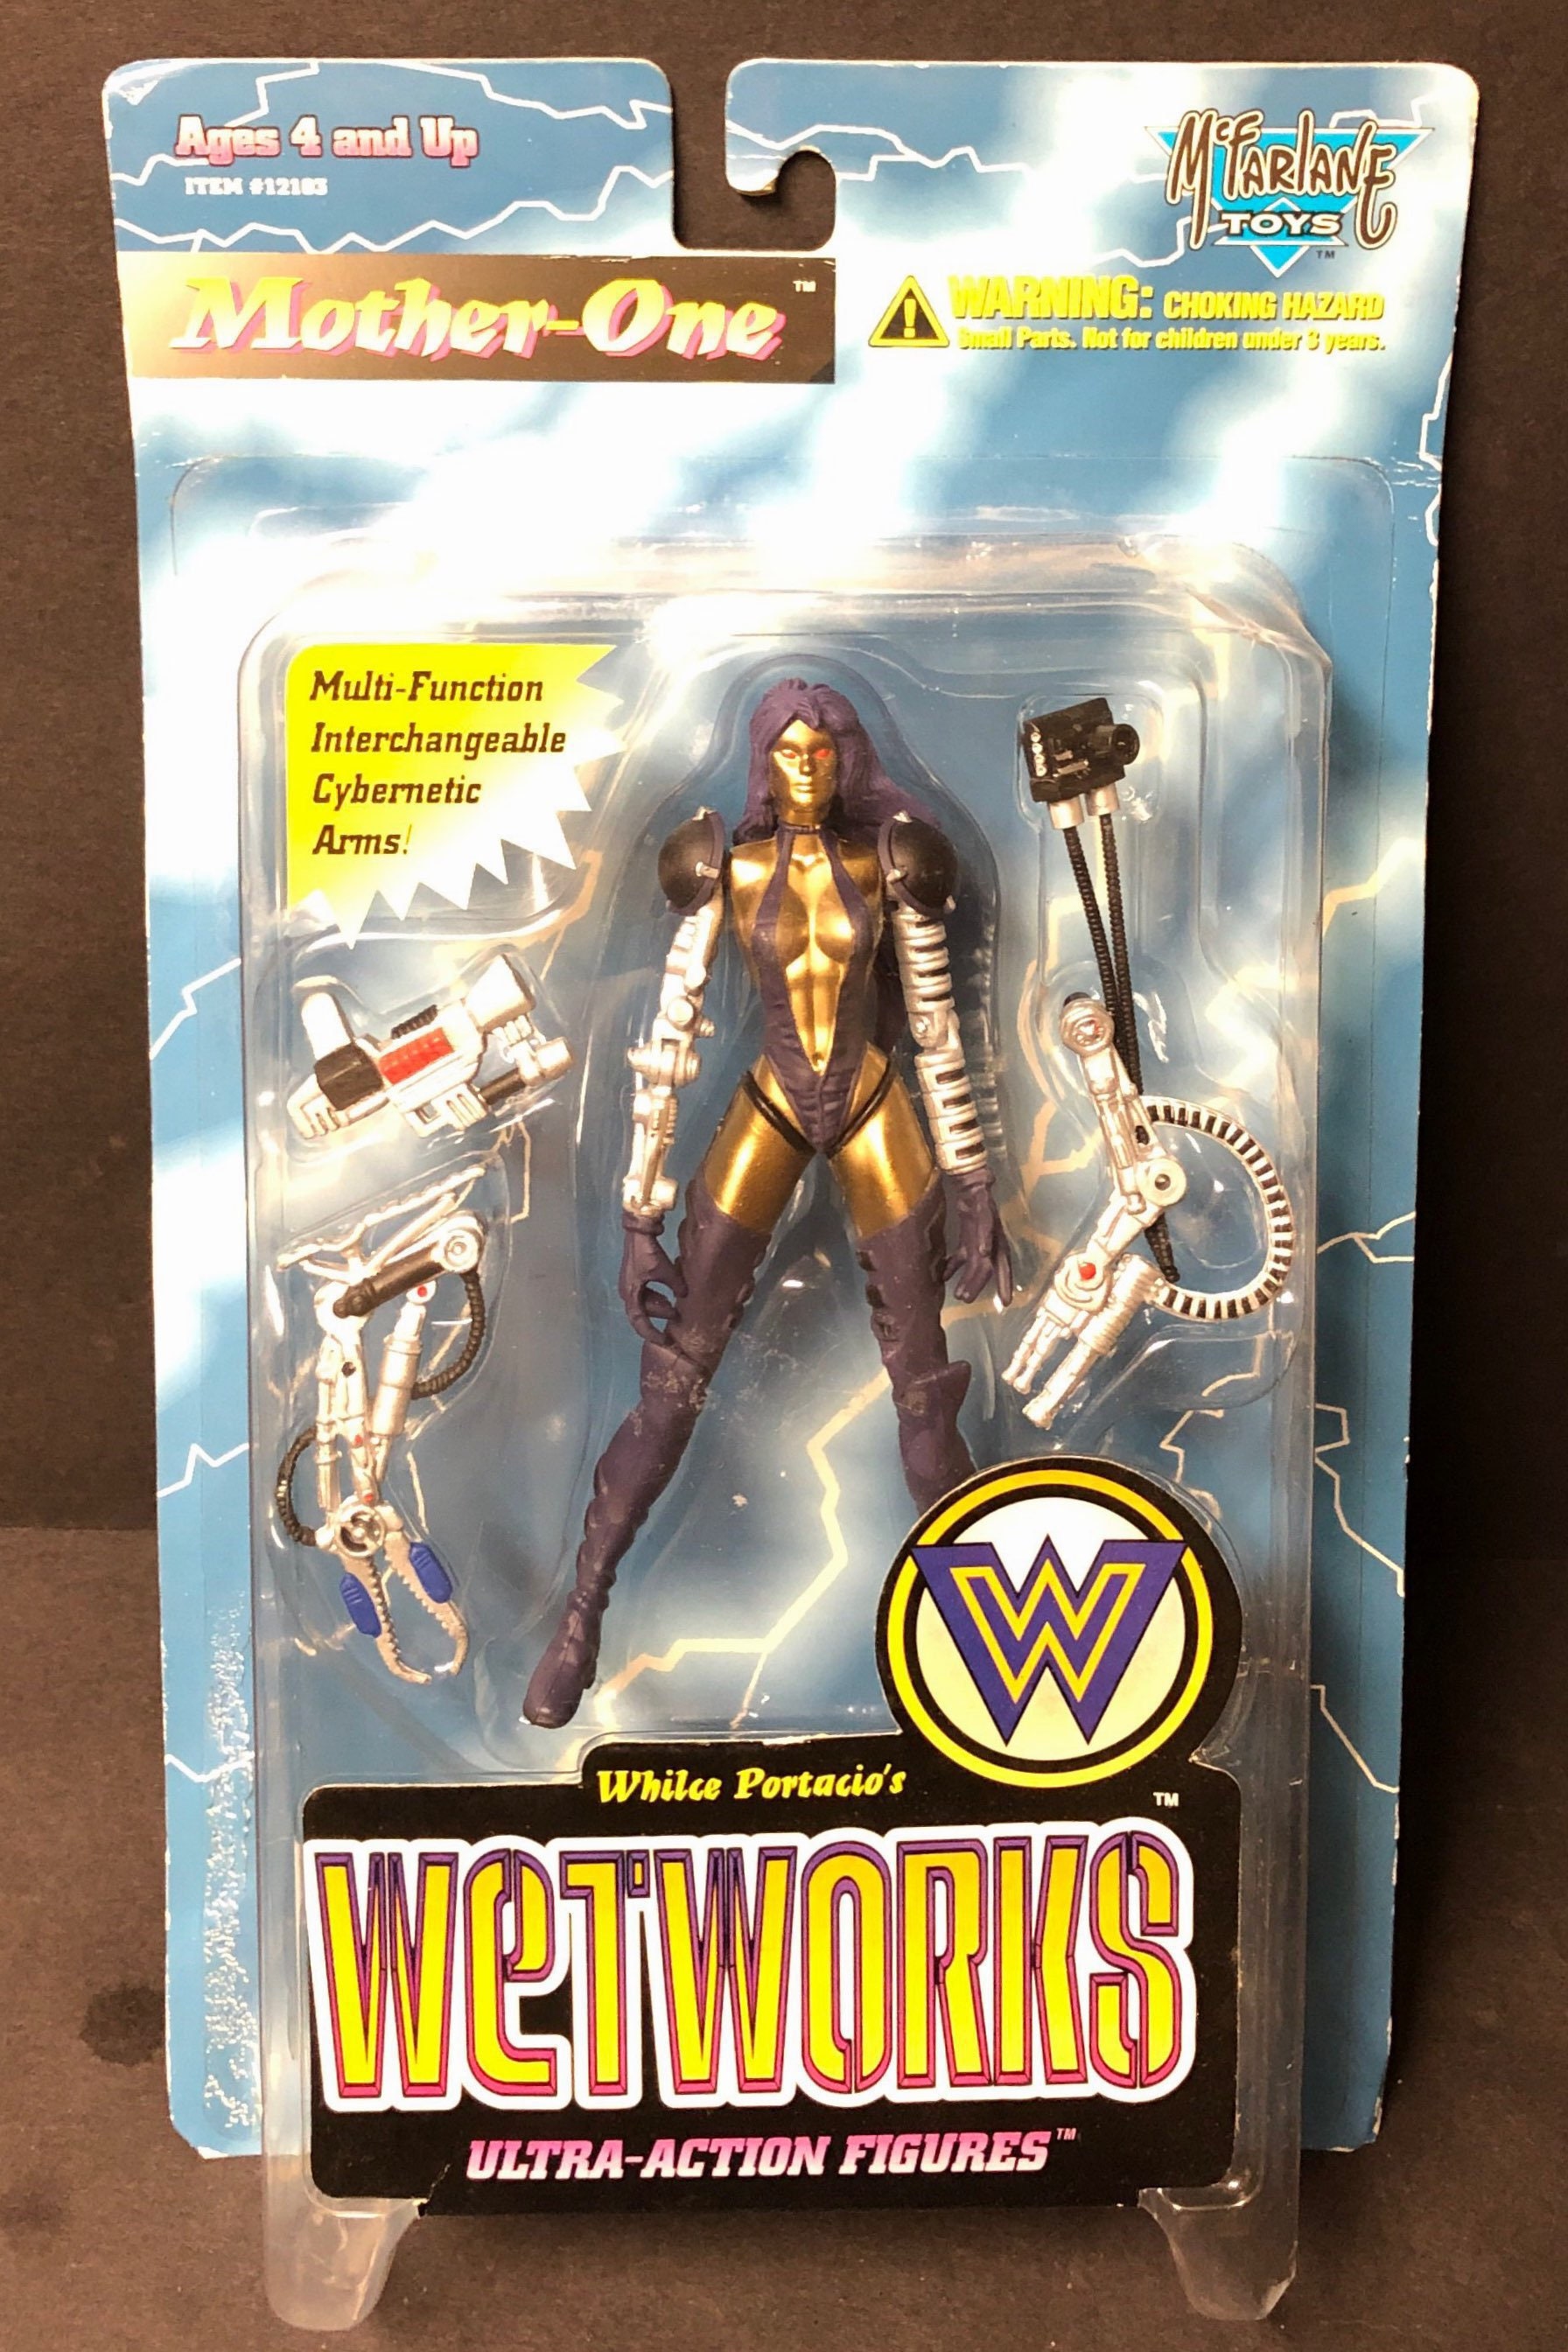 Vampire Wetworks 7 Inch Action Figure McFarlane Toys 1995 for sale online 